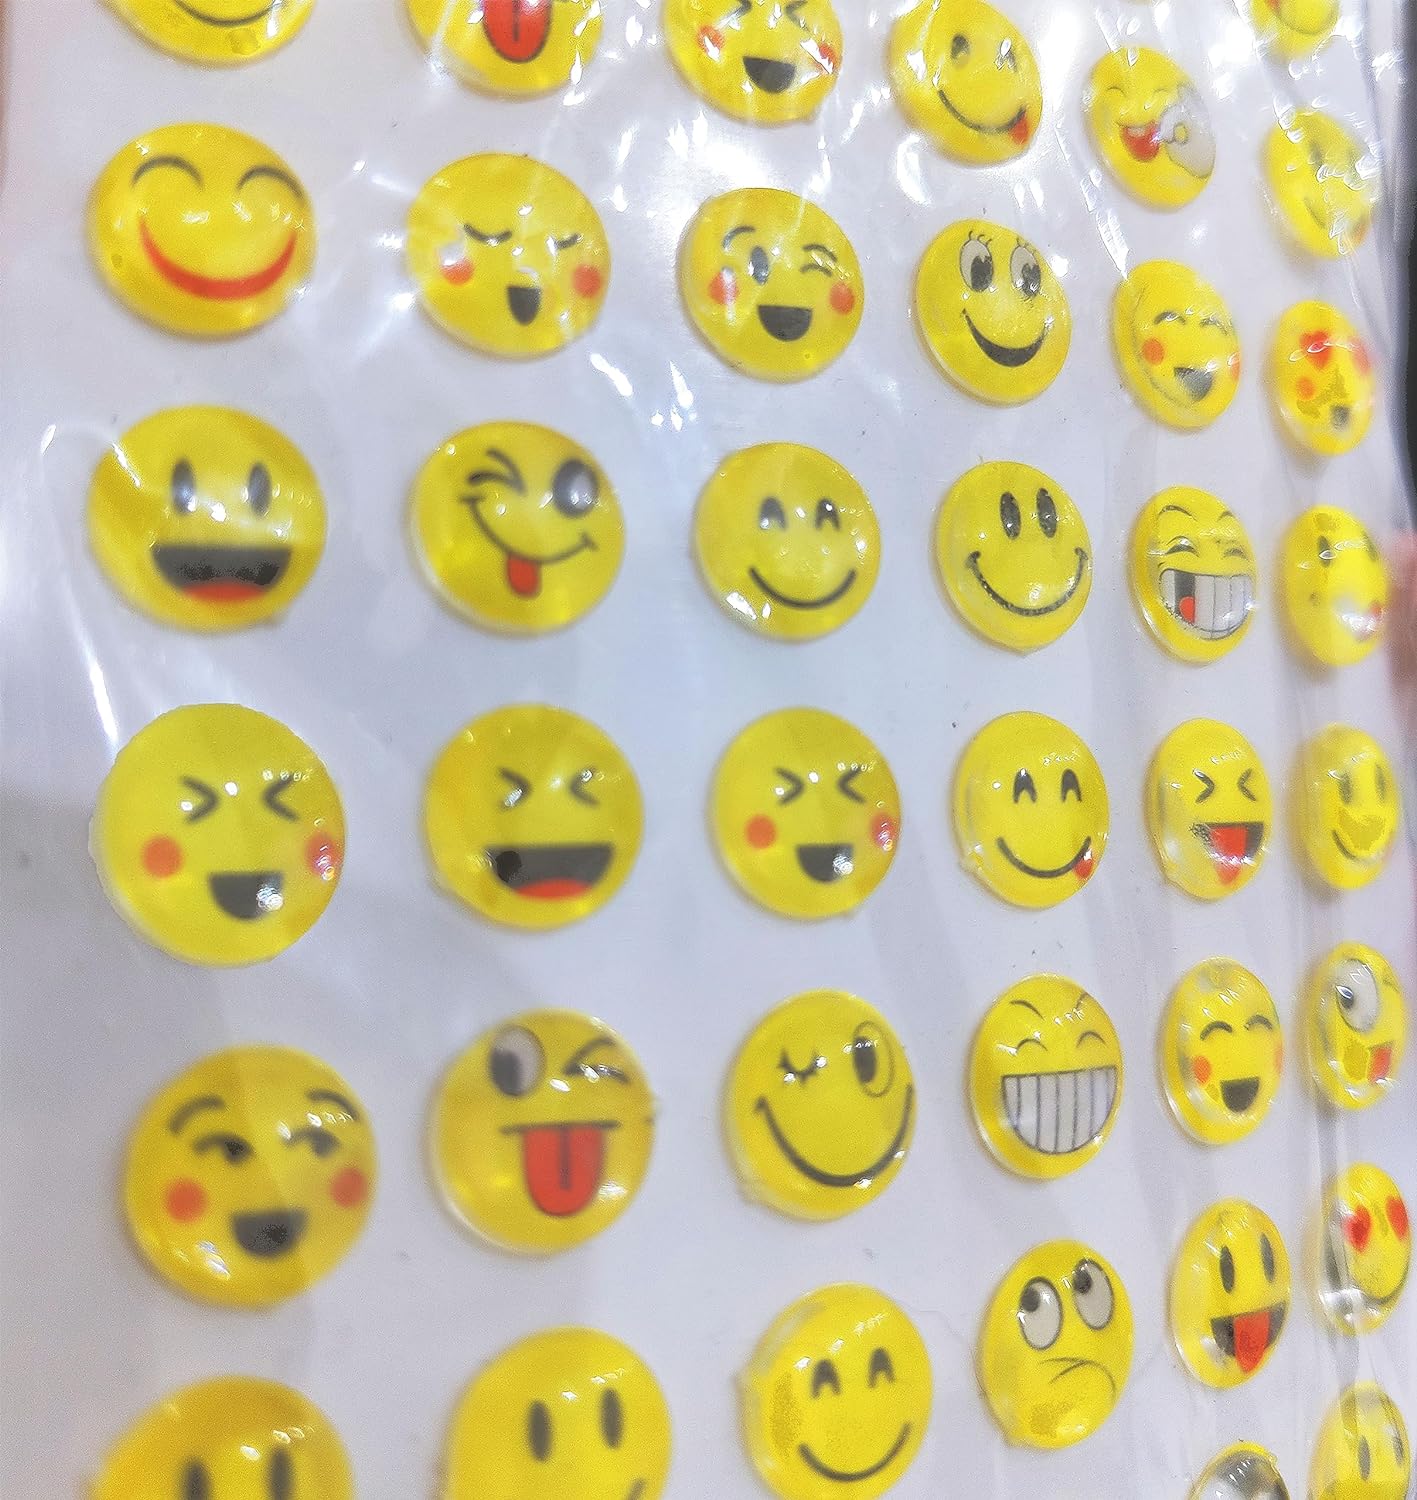 Crystal Stickers ® Emoji with Multicolor Stars Stickers Hard Transparent Plastic